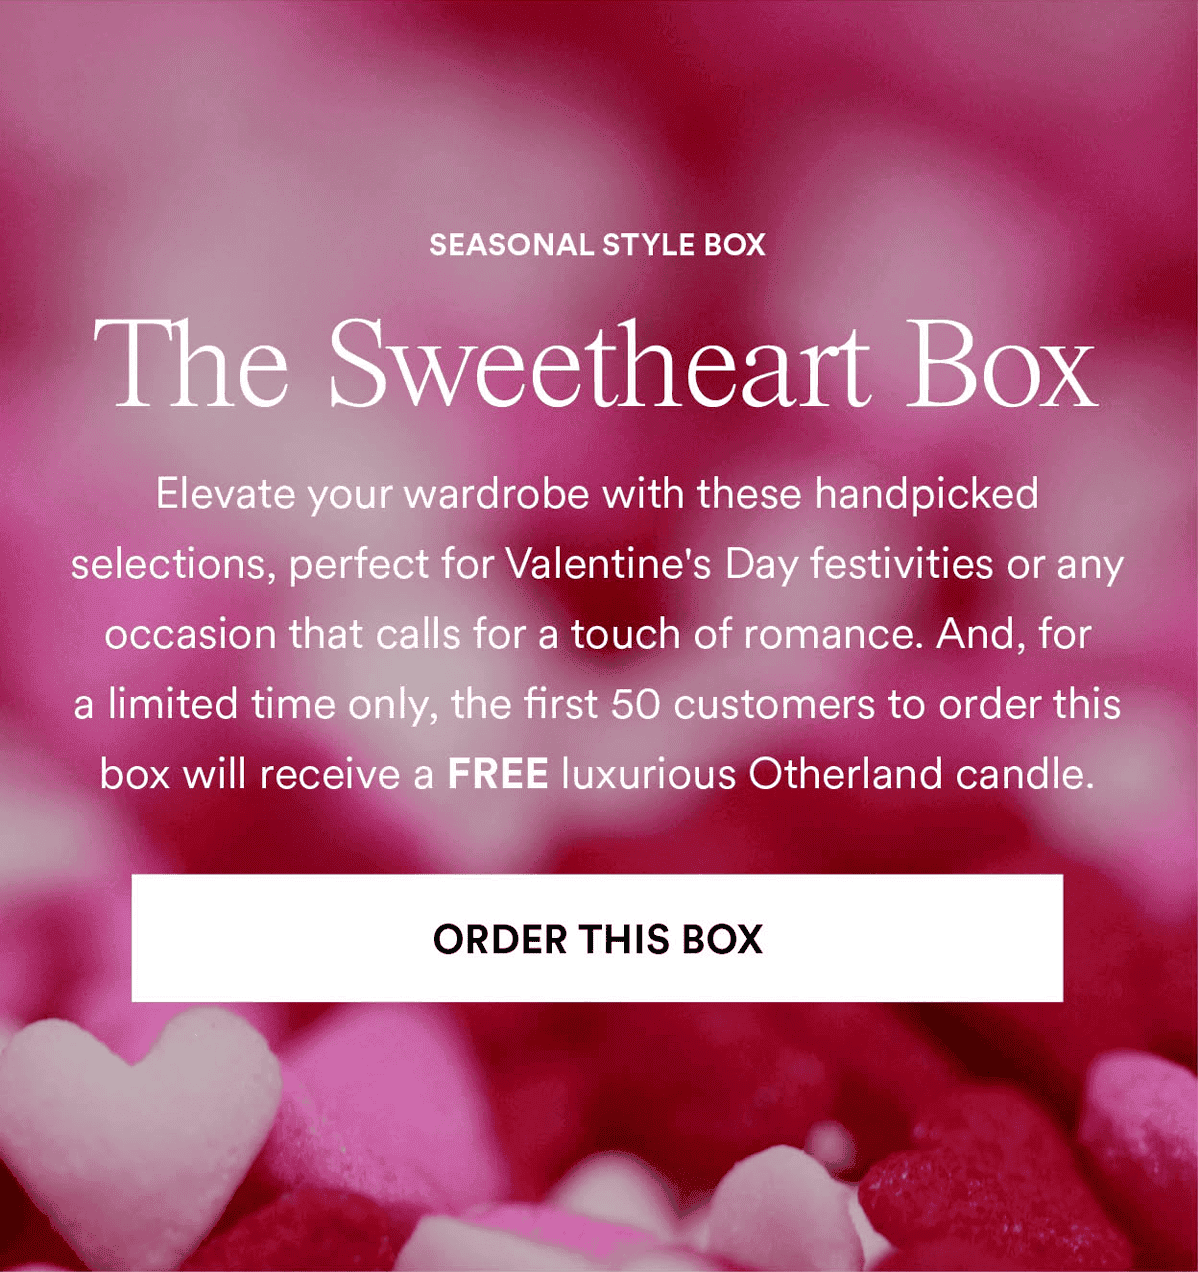 The Sweetheart Box. Elevate your wardrobe with these handpicked selections, perfect for Valentine's Day festivities or any occasion that calls for a touch of romance. And, for a limited time only, the first 50 customers to order this box will receive a FREE luxurious Otherland candle.. Order This Box